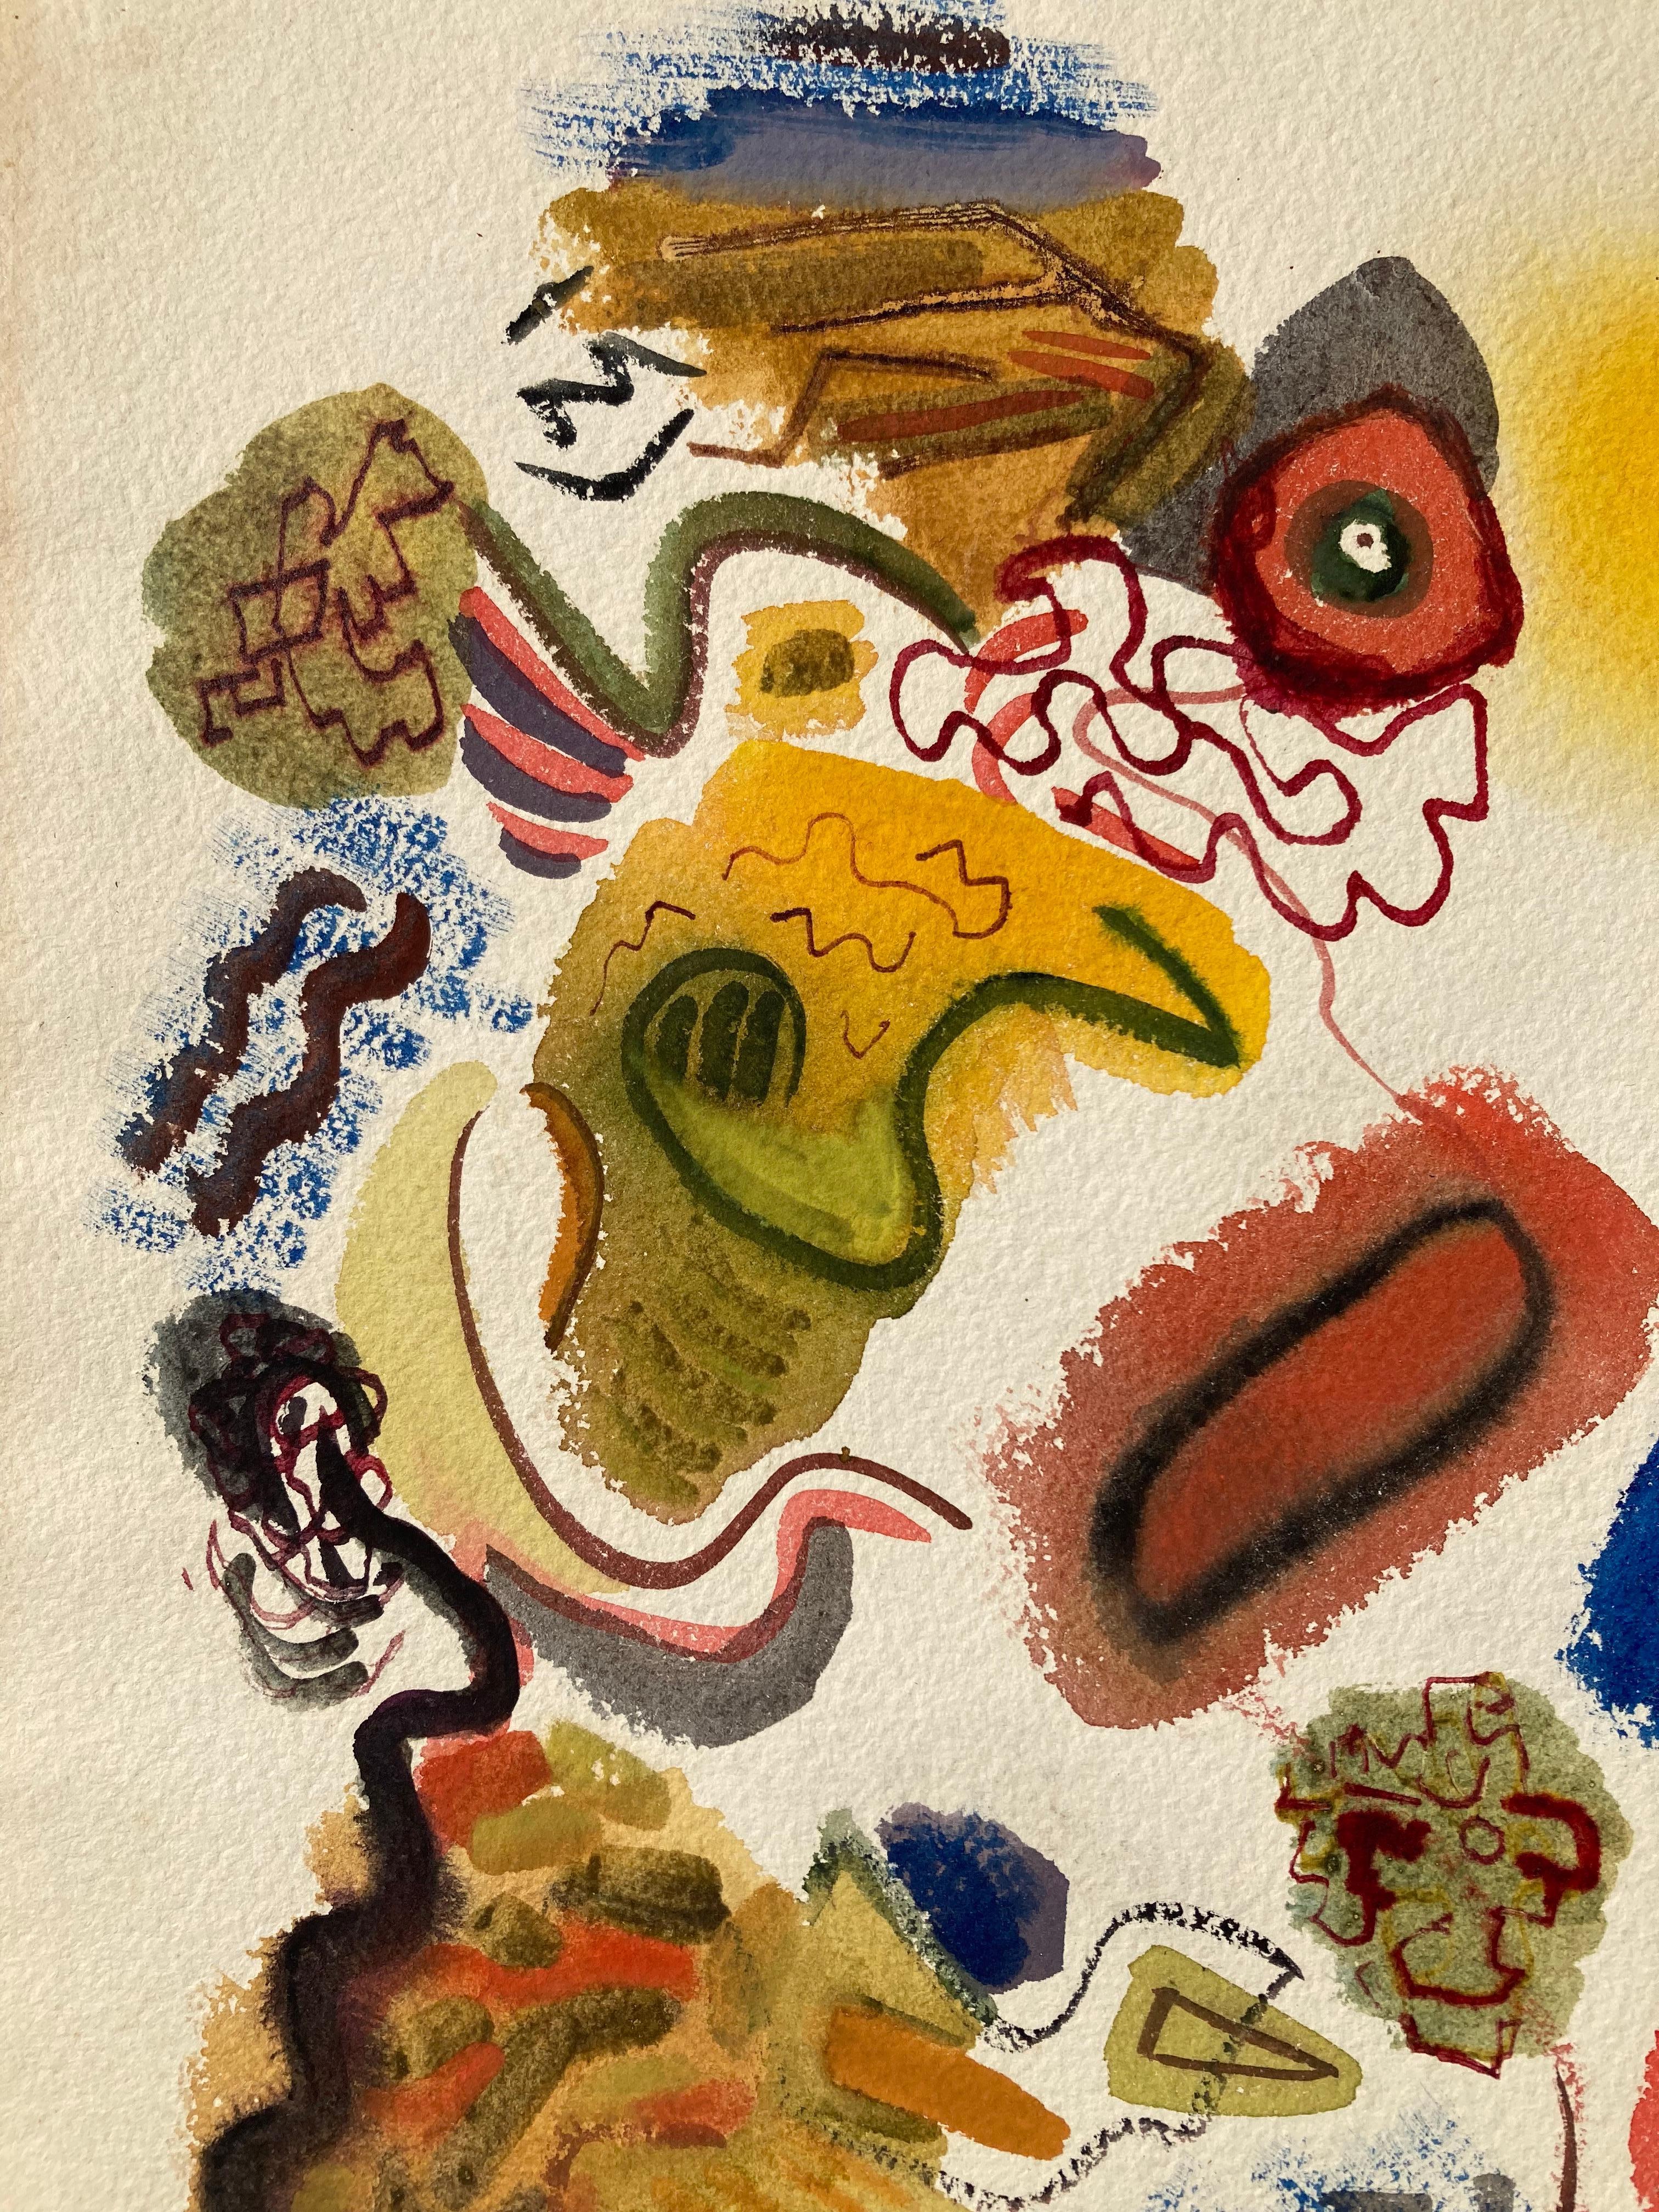 ABSTRACTION - Outsider Art Art by Henry Miller